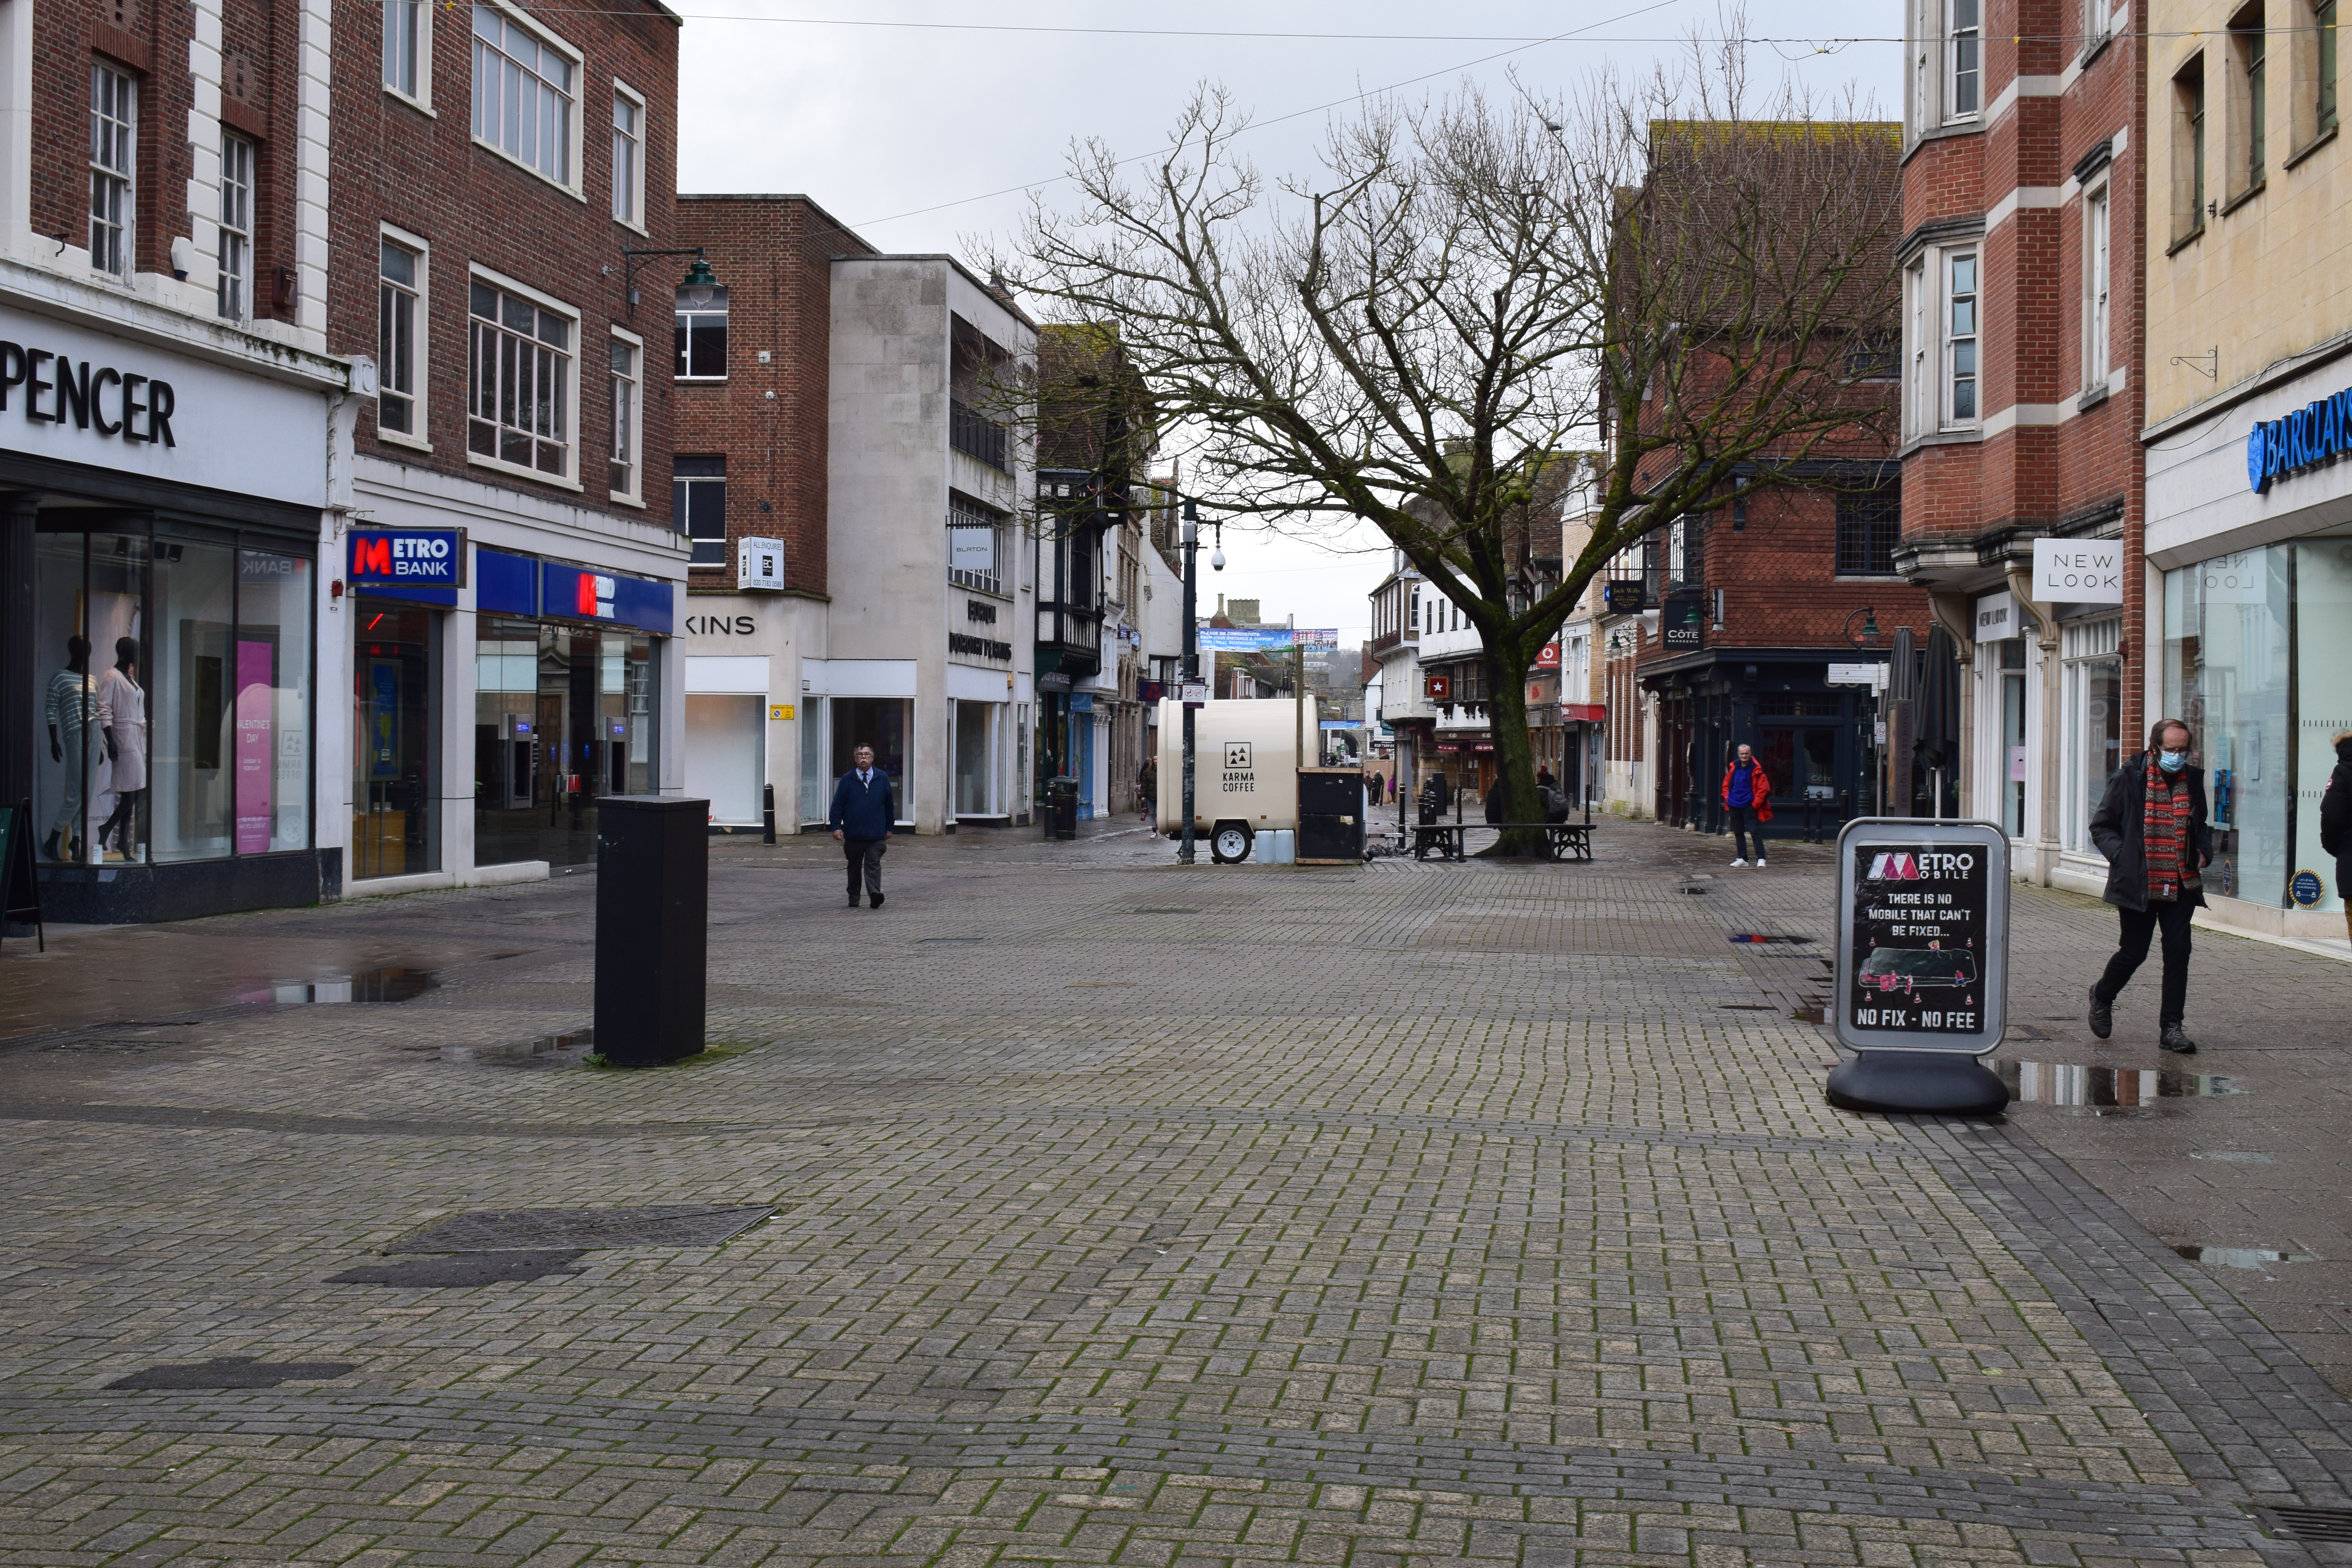 Picture C: Canterbury city centre, which is normally busy, entirely empty during the middle of the day. Some people are pictured, all wearing masks. 